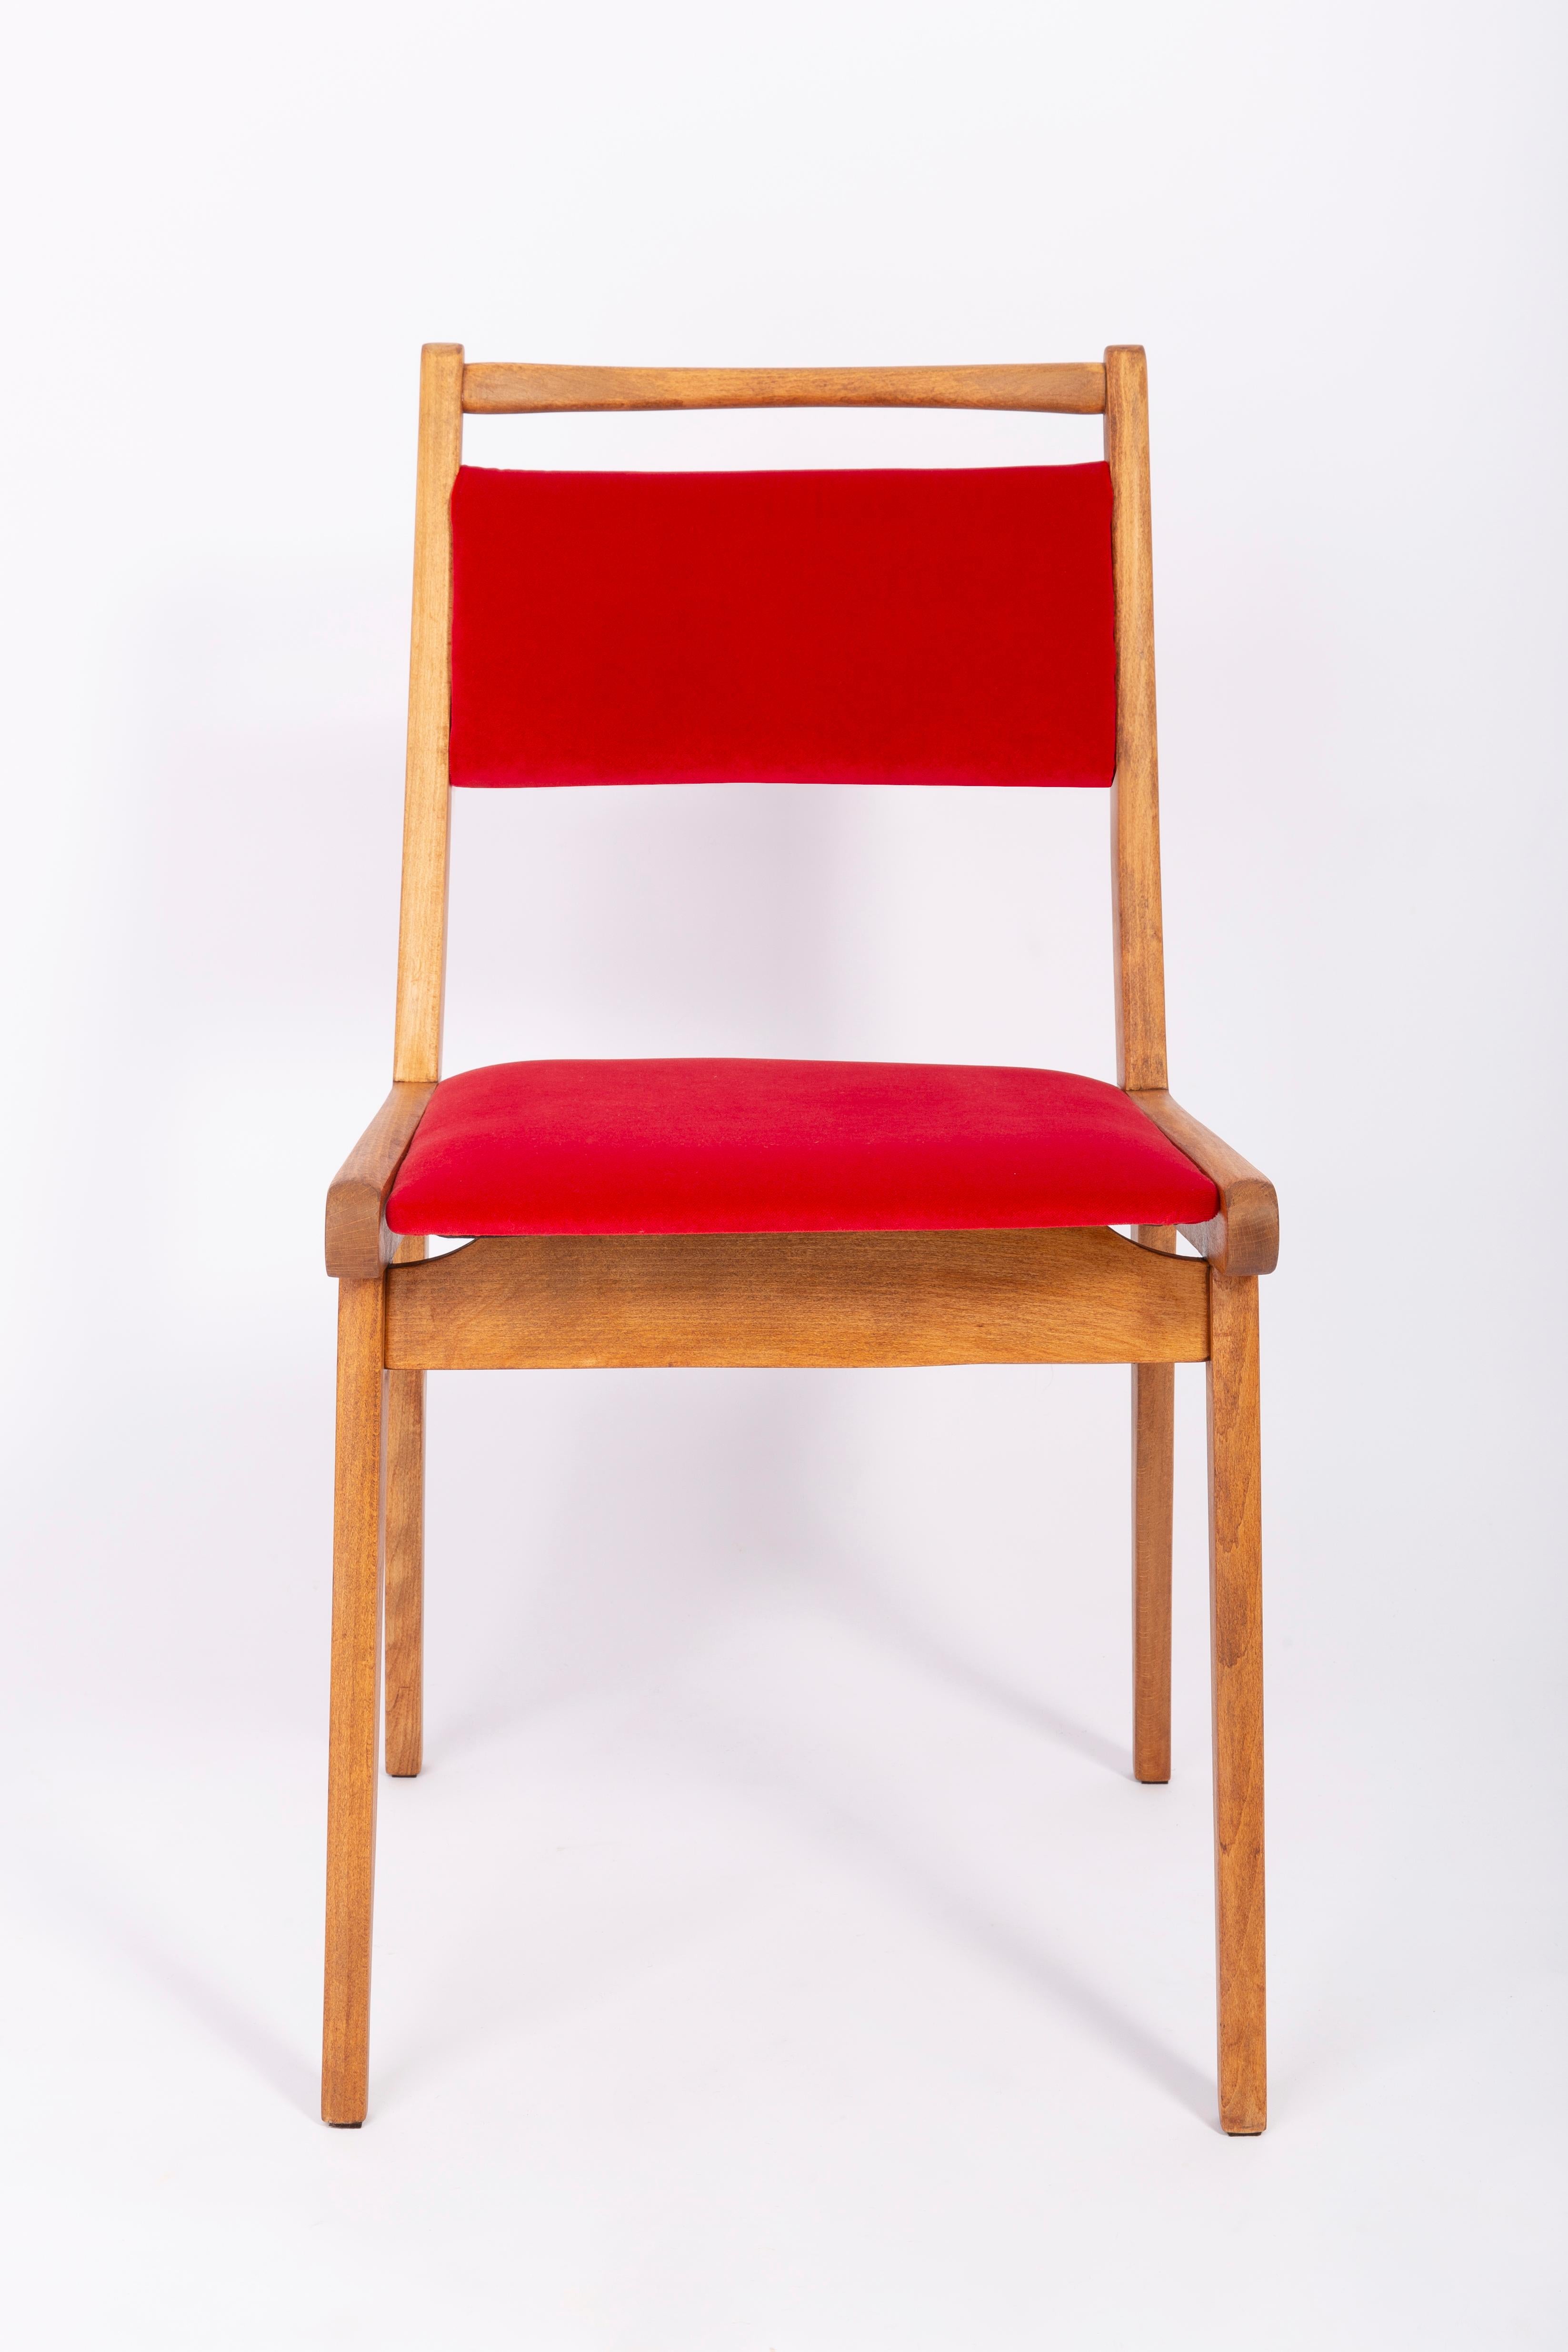 Set of Four 20th Century Red Velvet Chairs, by Rajmund Halas, Poland, 1960s For Sale 1